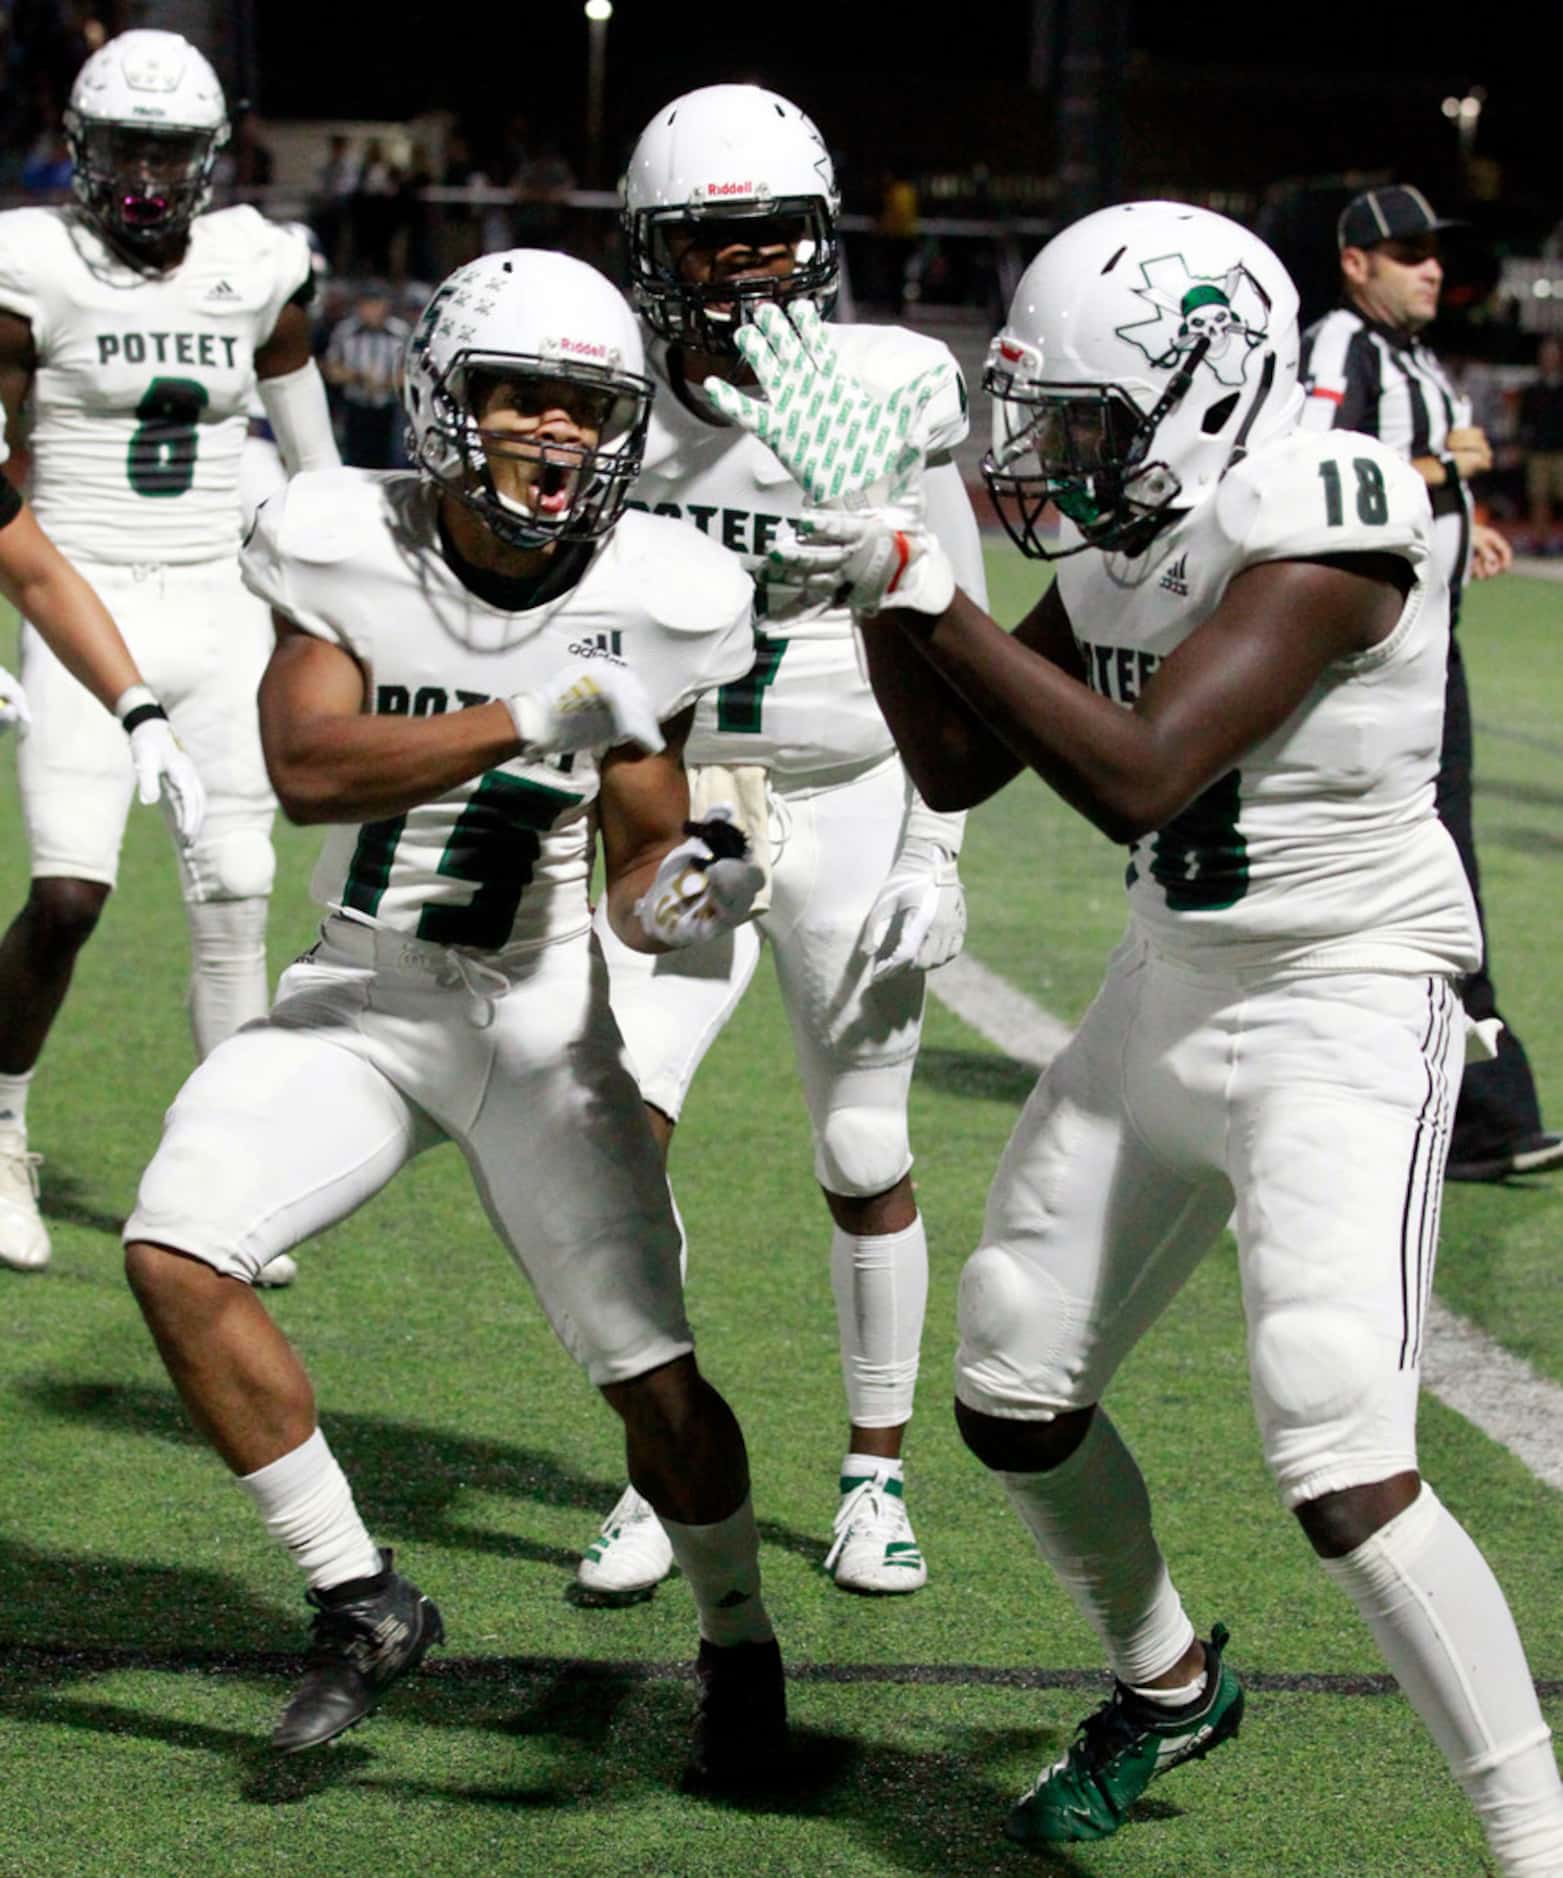 Poteet High's Xzaveon Jeans (15) celibrates with teammate De'Vyon Camps (18) after Camp's...